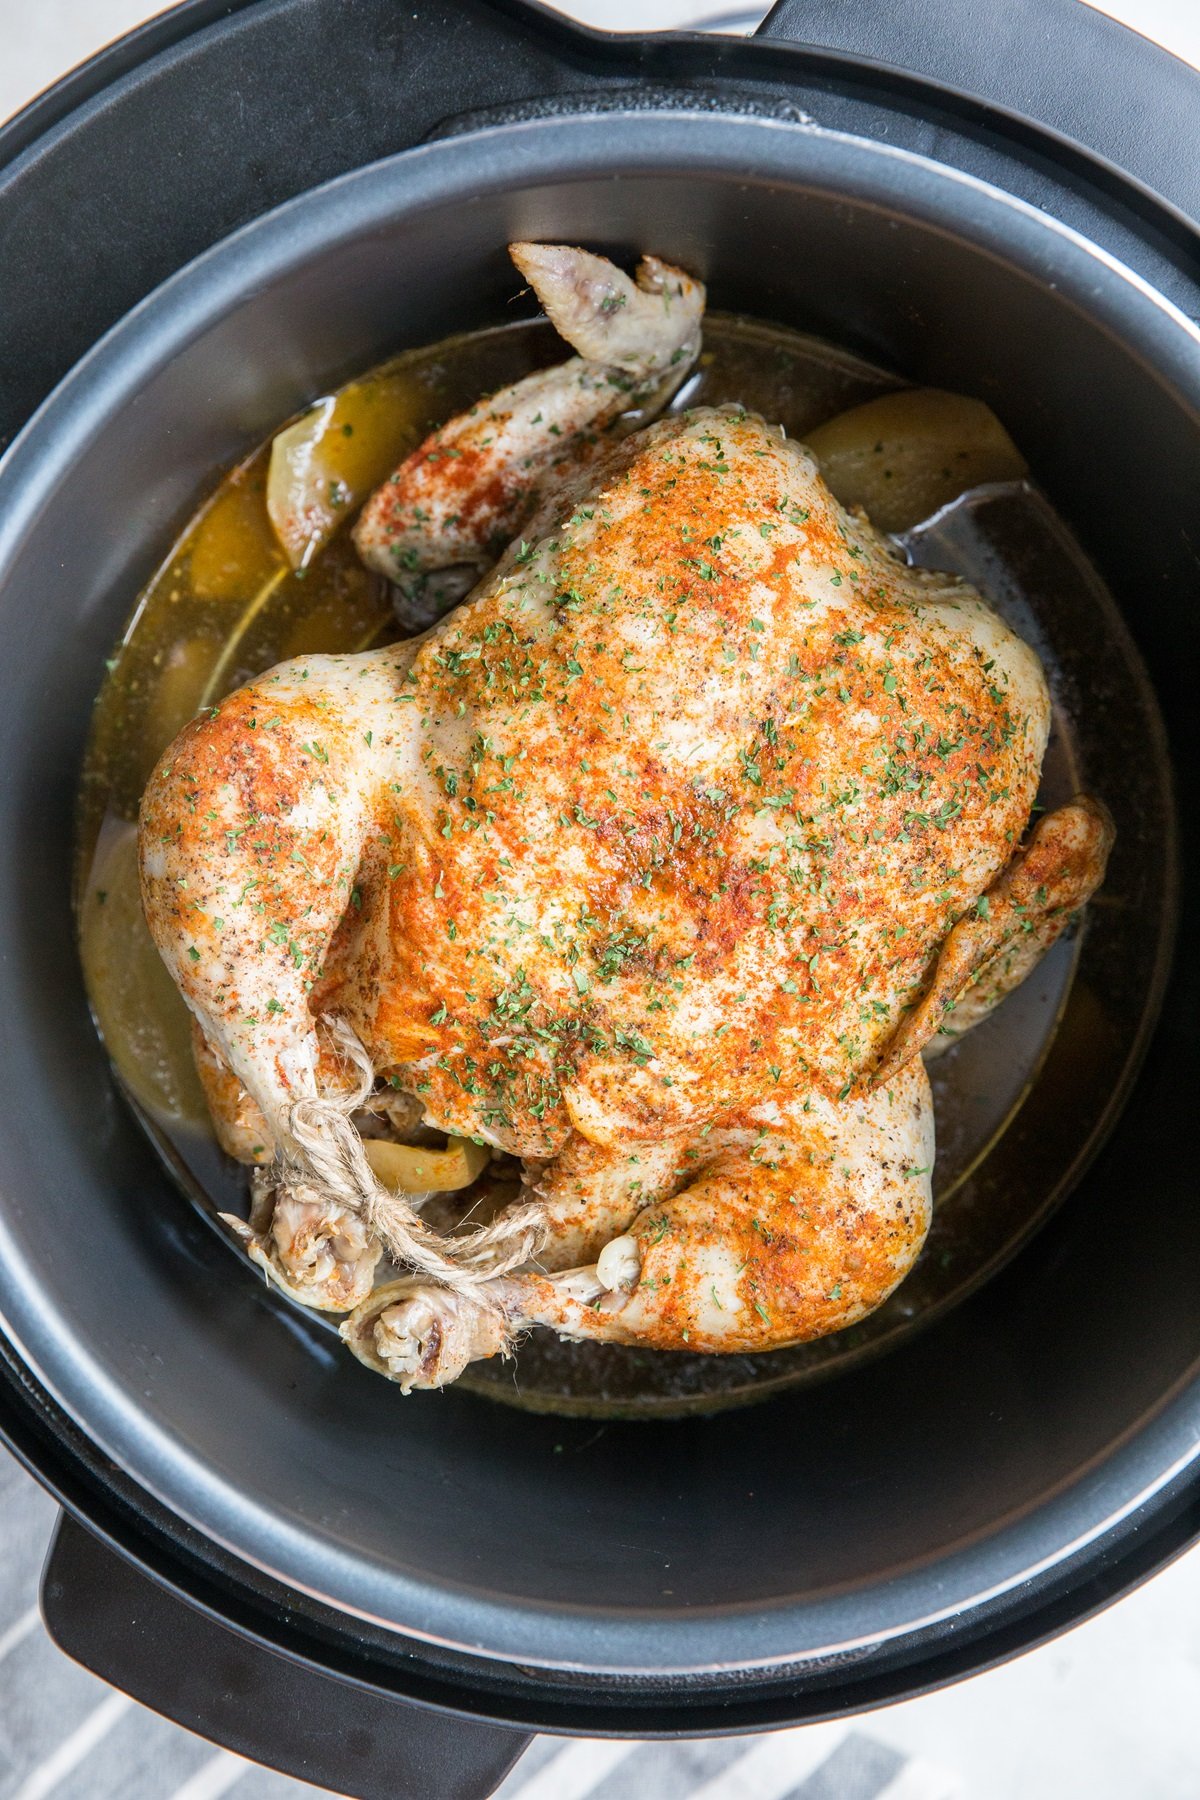 Cooked whole chicken inside an Instant Pot